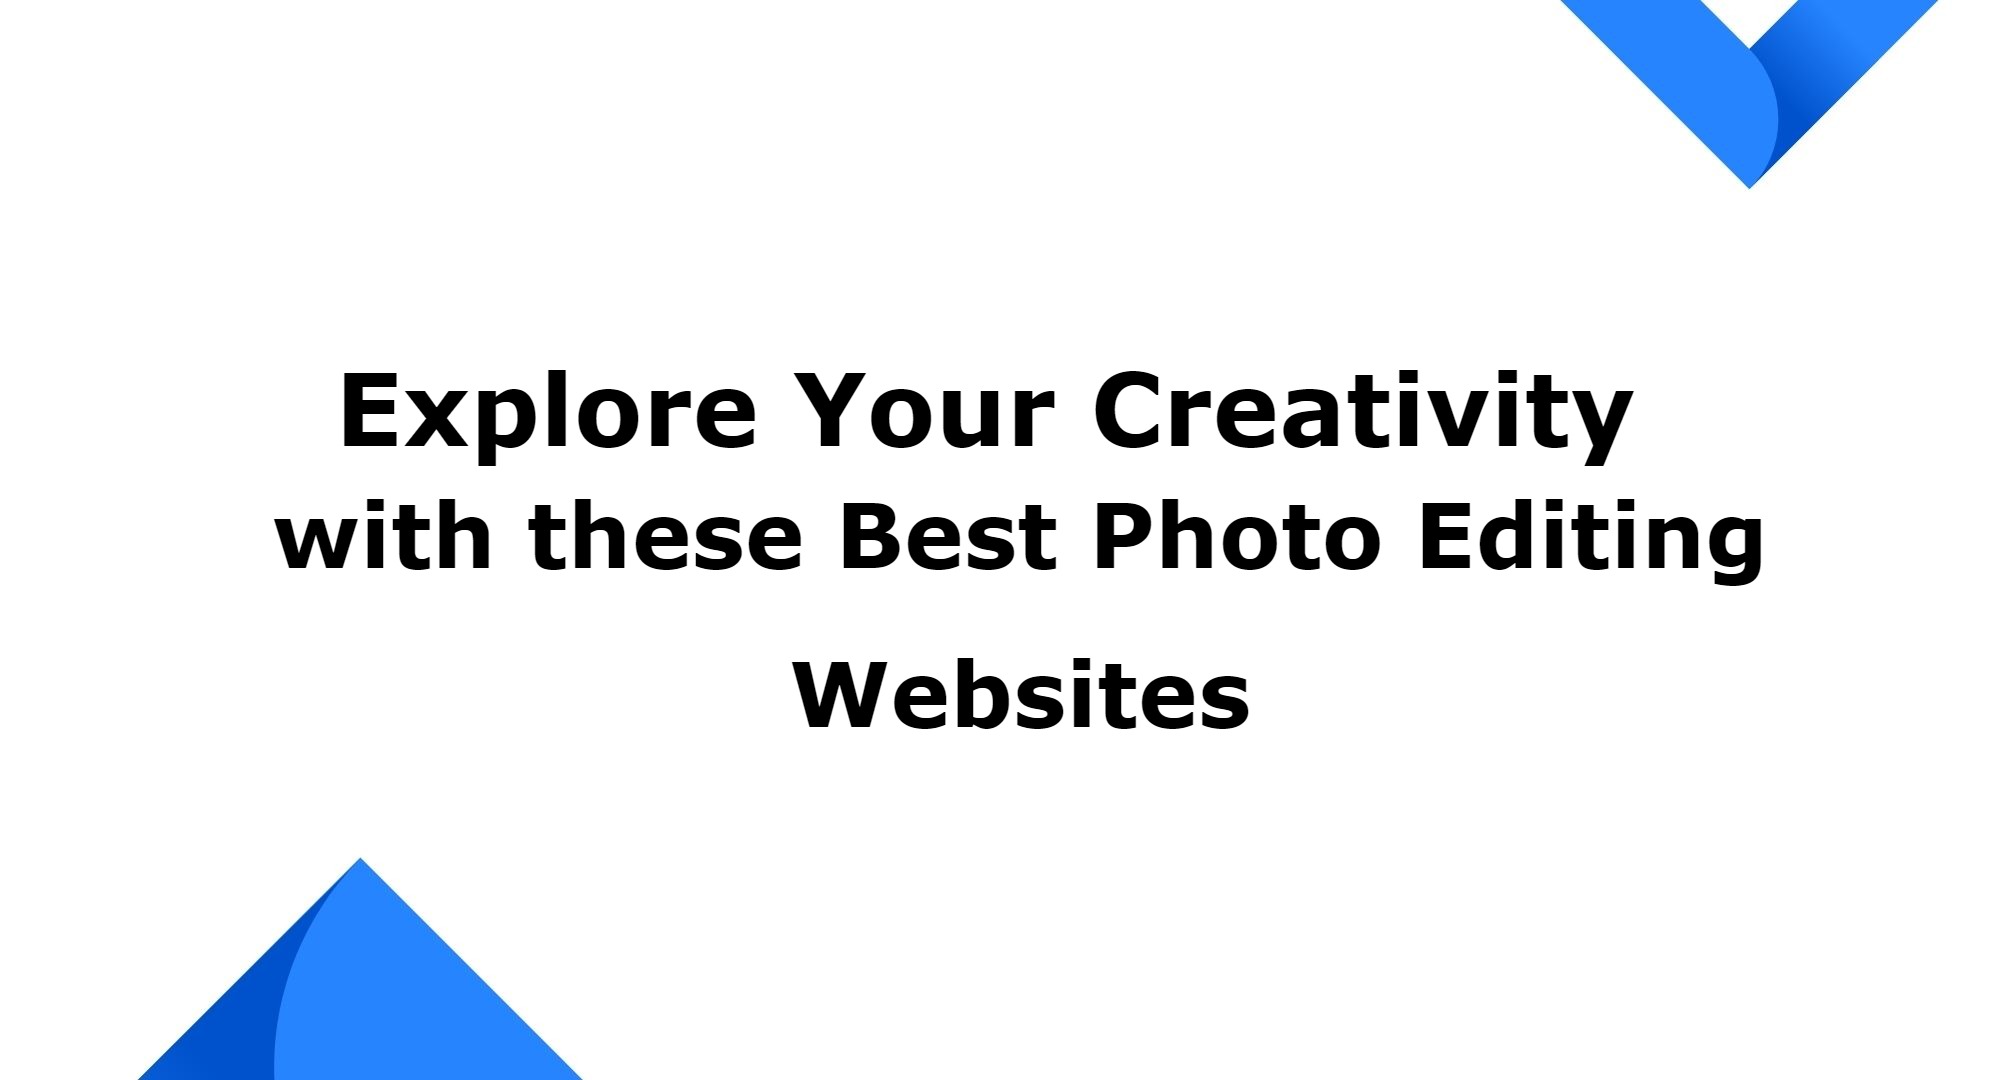 Explore Your Creativity with the Best Online Photo Editing Websites